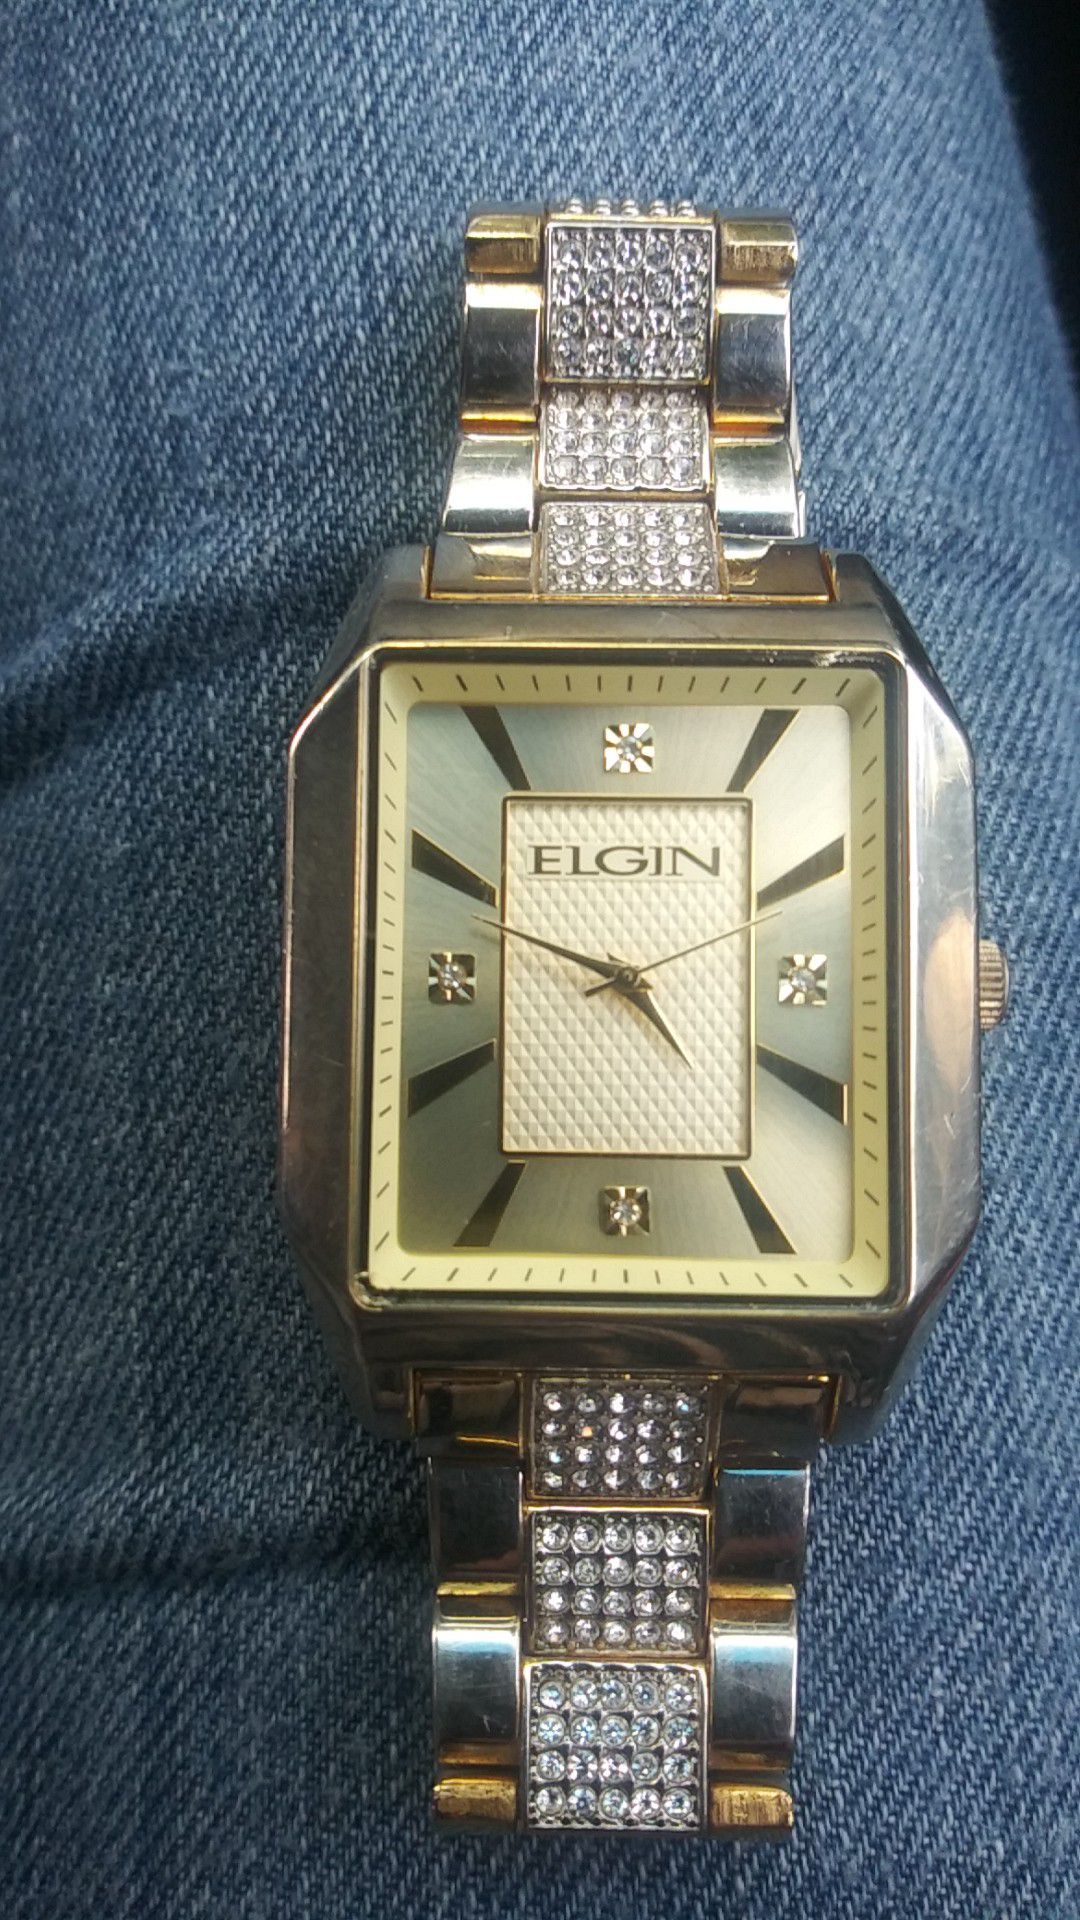 Mens Elgin watch water resistant (not gold plated and 120 quarts crystals but im pretty sure face and inside is gold and diamond chip)